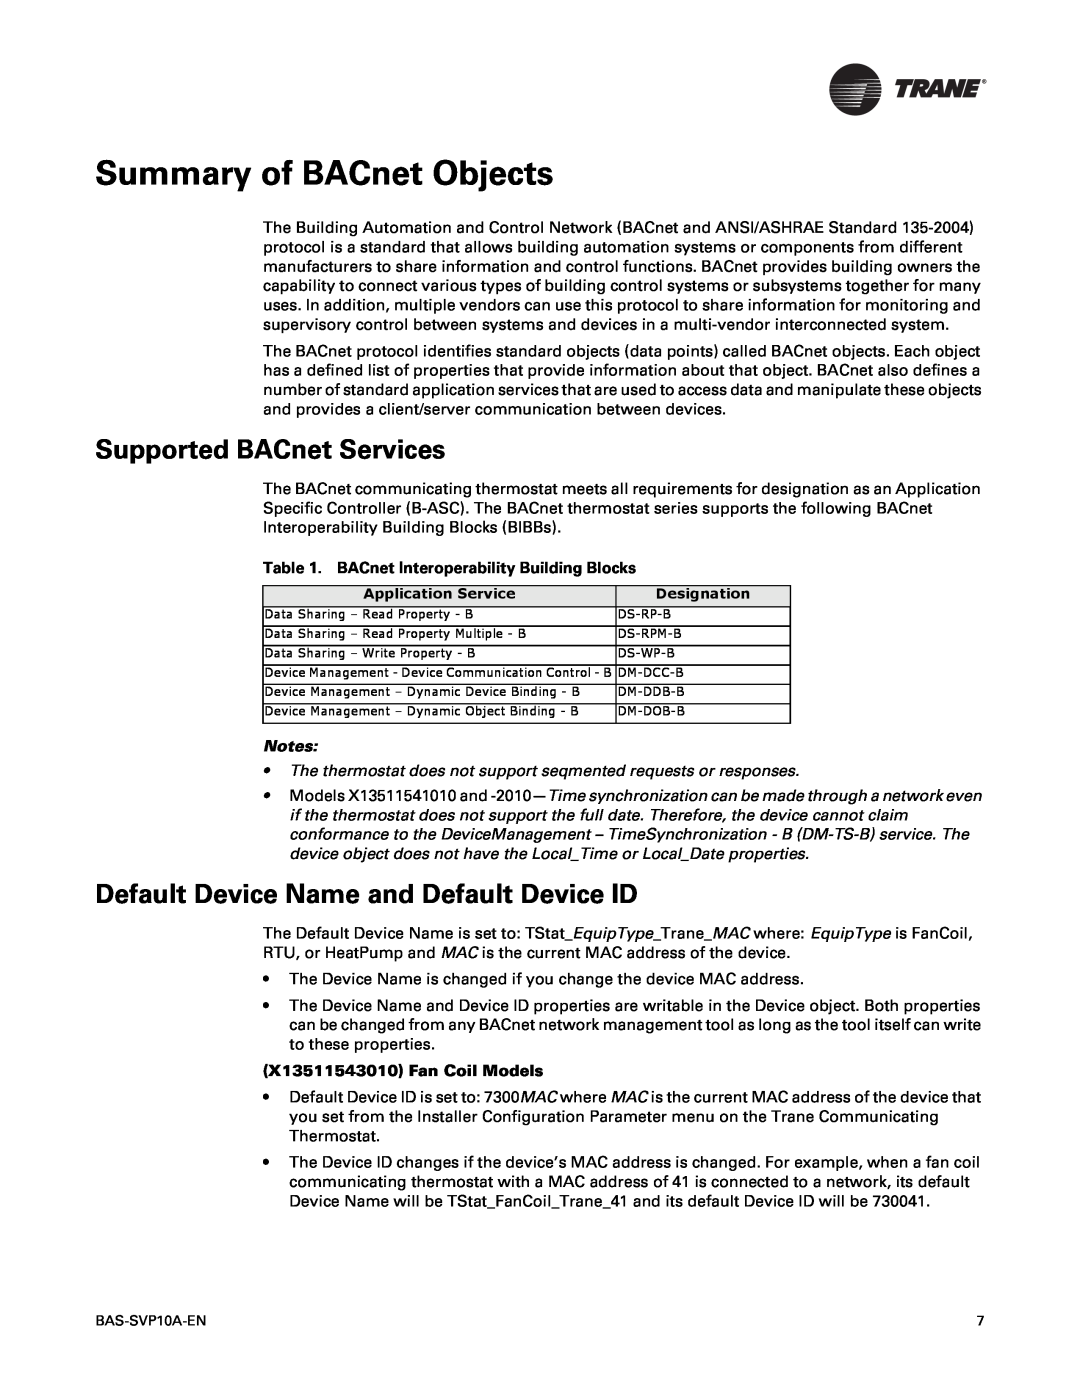 Trane Trane Communicating Thermostats (BACnet), BAS-SVP10A-EN manual Summary of BACnet Objects, Supported BACnet Services 